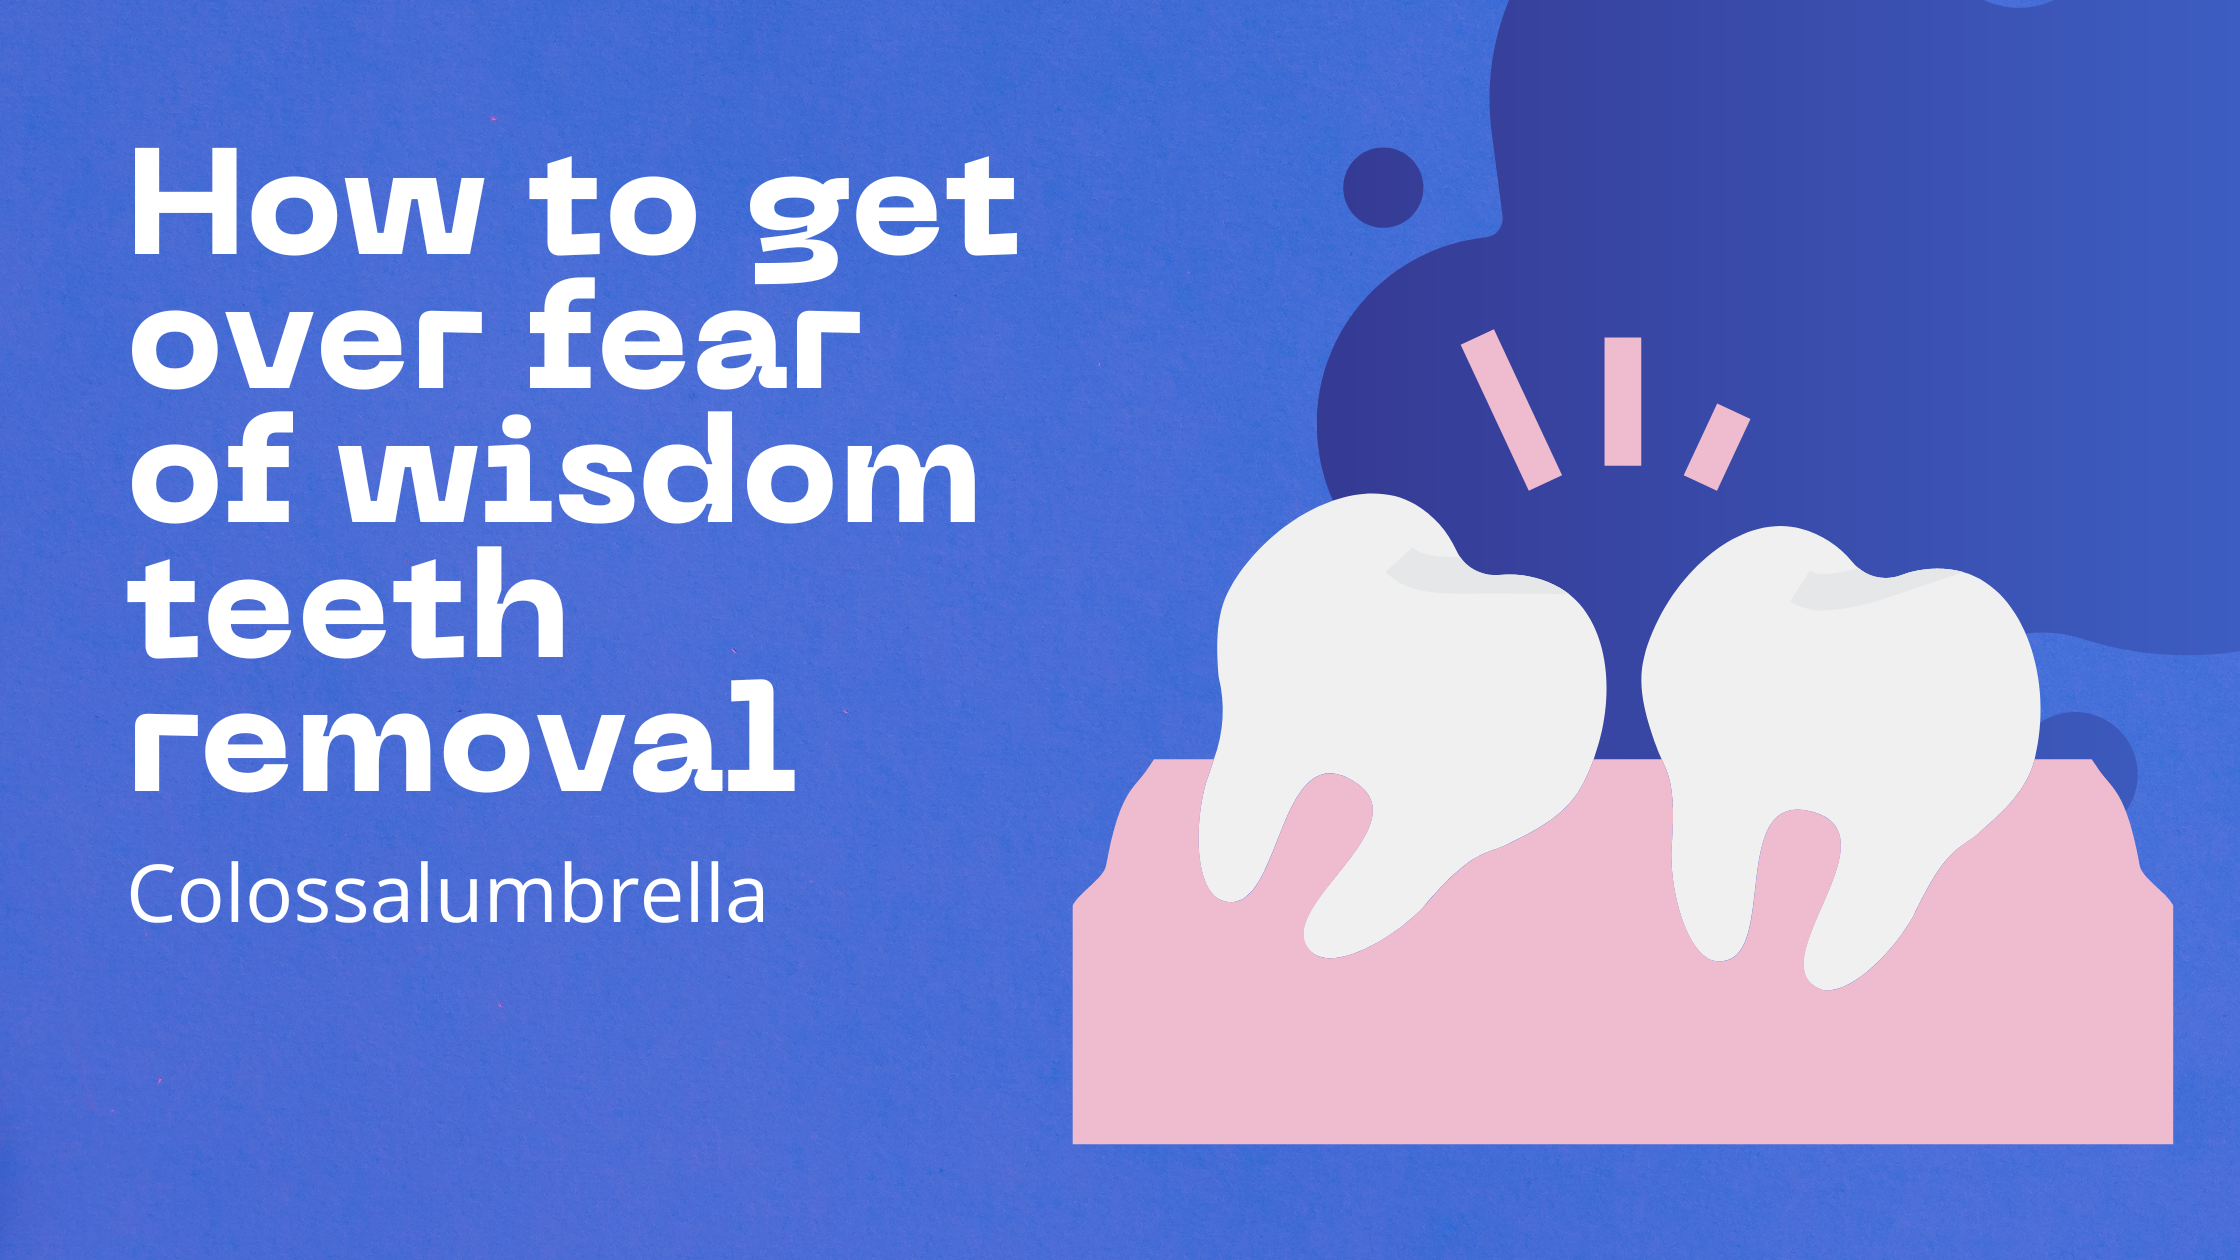 9 Useful tips on how to get over fear of wisdom teeth removal